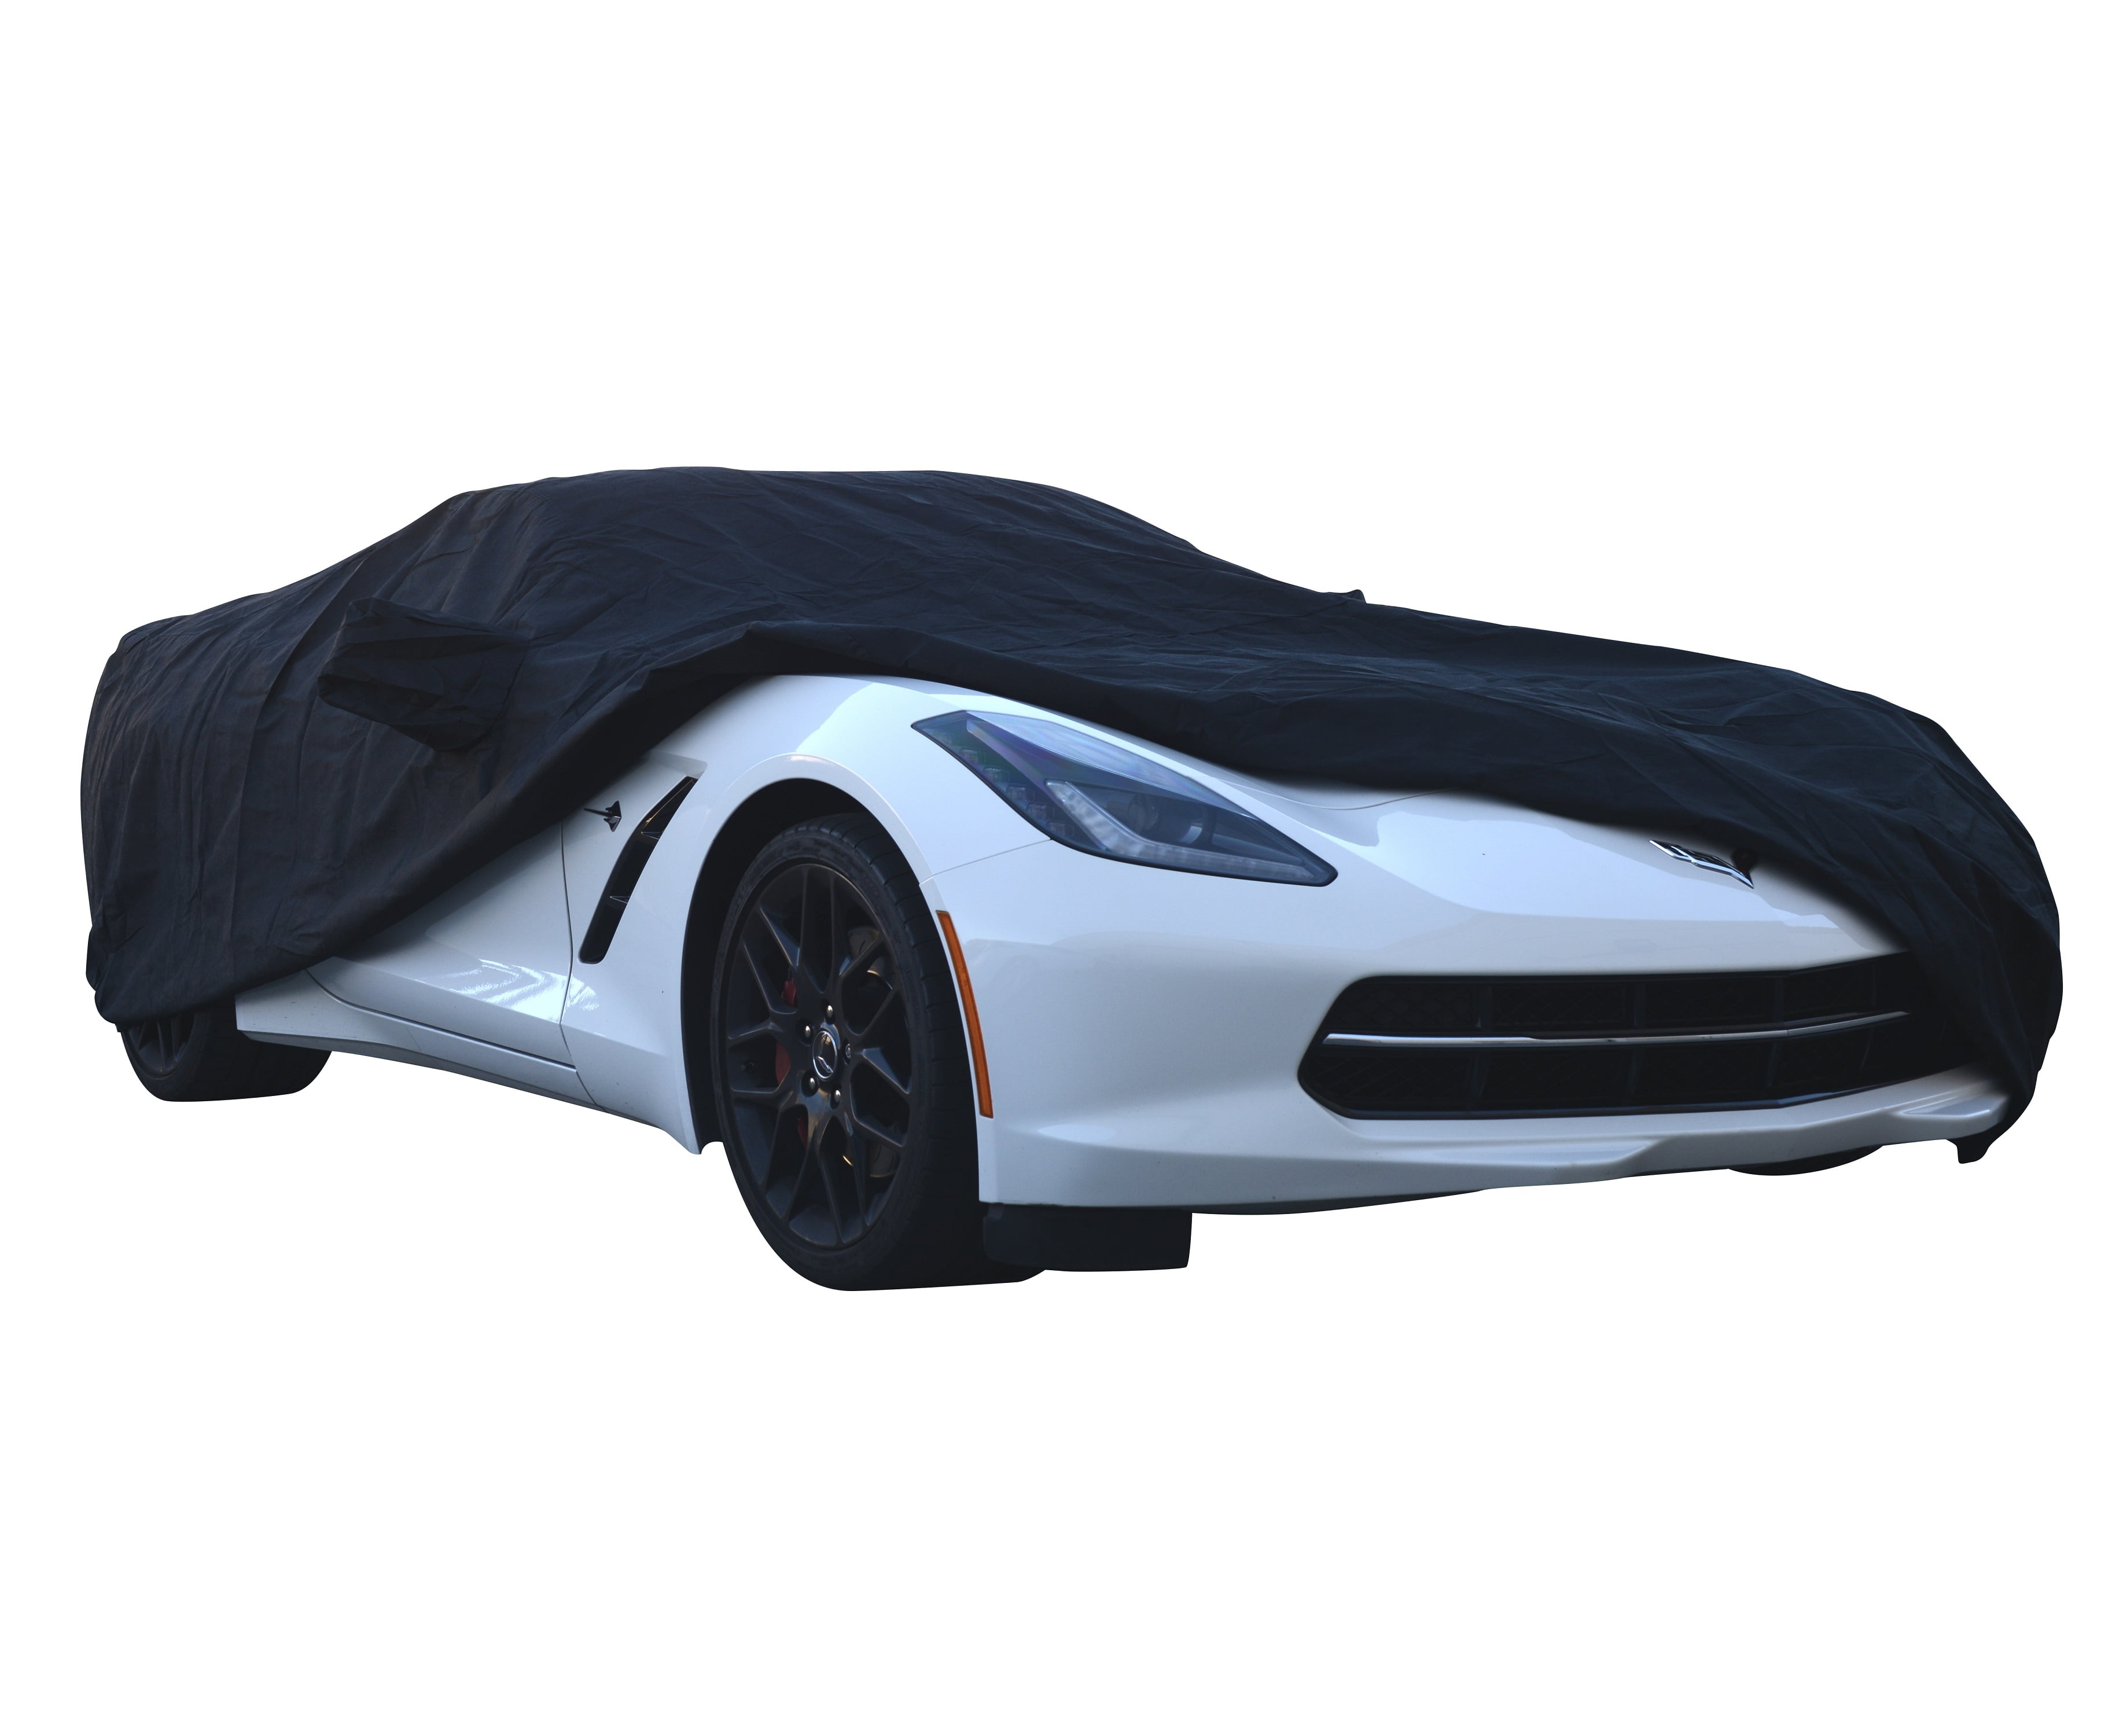 All Weather Waterproof Breathable Car Covers with Windproof Straps Car Tarp with Reflective Strips Old street Car Cover Compatible with Chevrolet Corvette C7 Stingray 2dr Convertible 2014-2019 